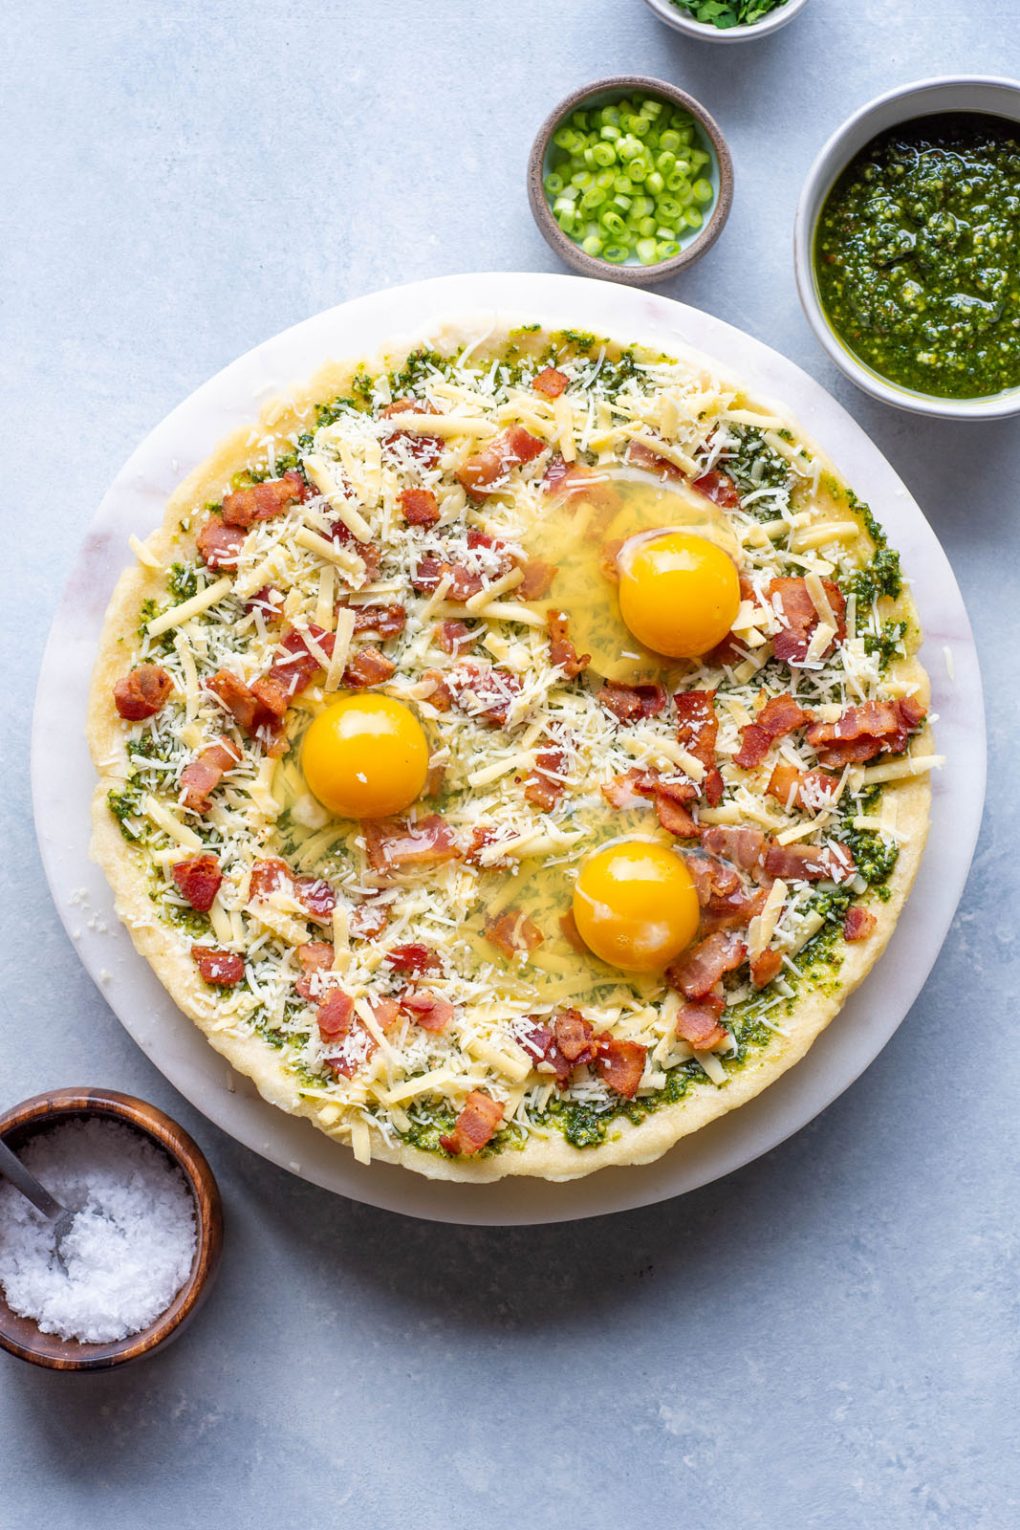 Overhead shot of an uncooked breakfast pizza. Topped with cheese, crispy bacon, raw sunny side up eggs, and fresh herbs and green onions. On a light colored marble serving tray and a light background. Next to a small bowl of sliced green onions, and another small bowl of pesto. 